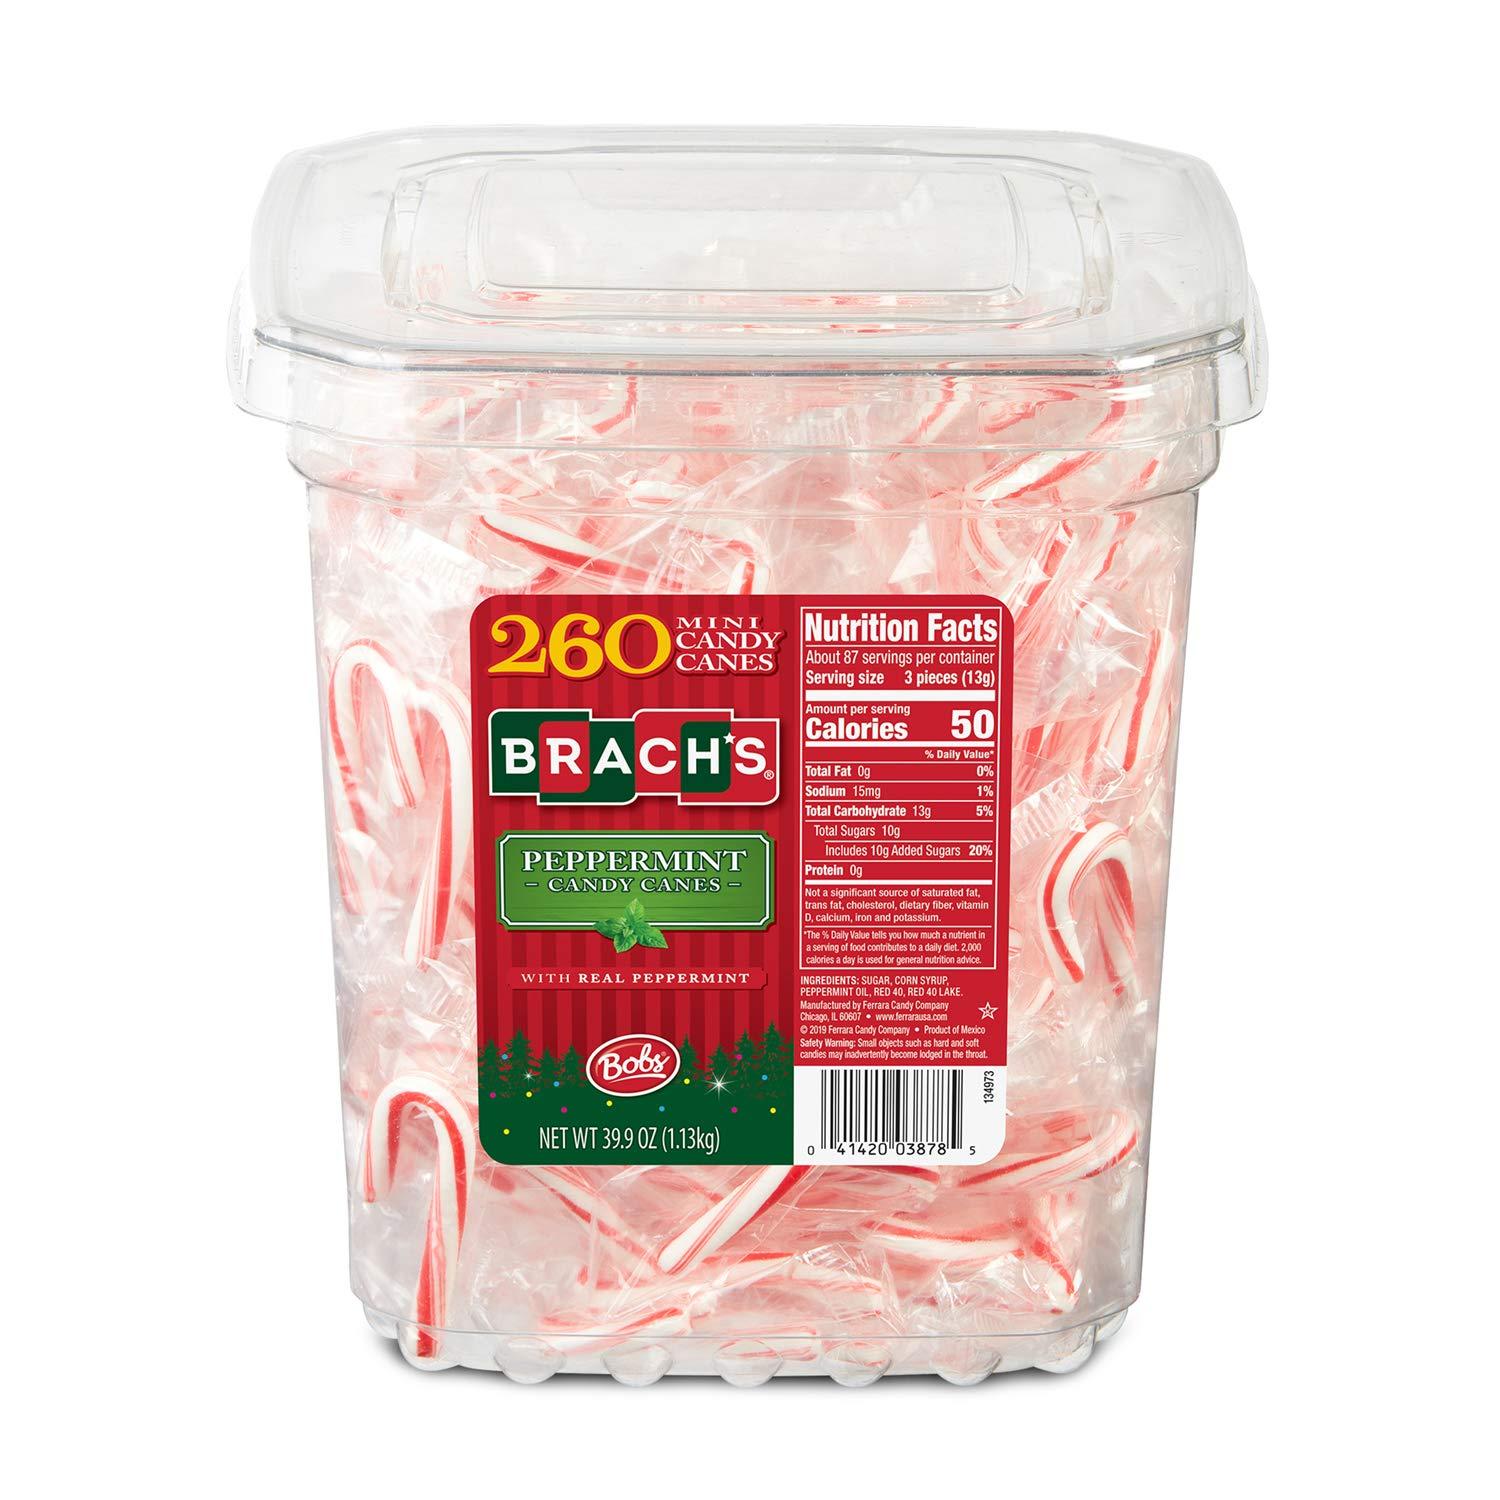 260 Brach's Mini Candy Canes Tub for $4.49